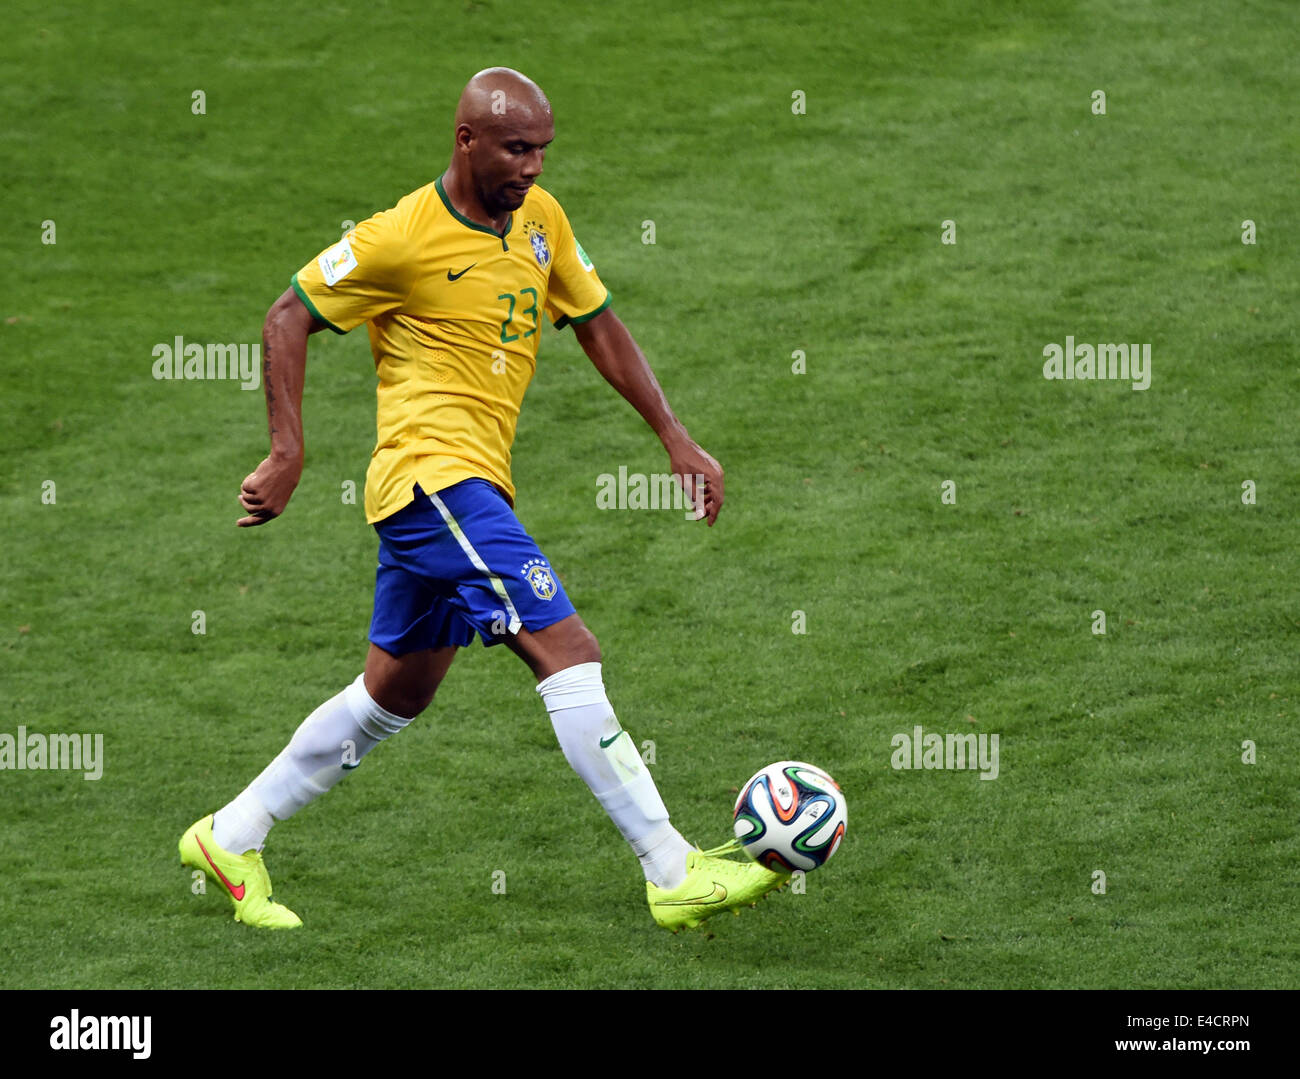 Belo Horizonte, Brazil. 08th July, 2014. Brazil's Maicon in action during the FIFA World Cup 2014 semi-final soccer match between Brazil and Germany at Estadio Mineirao in Belo Horizonte, Brazil, 08 July 2014. Photo: Andreas Gebert/dpa/Alamy Live News Stock Photo